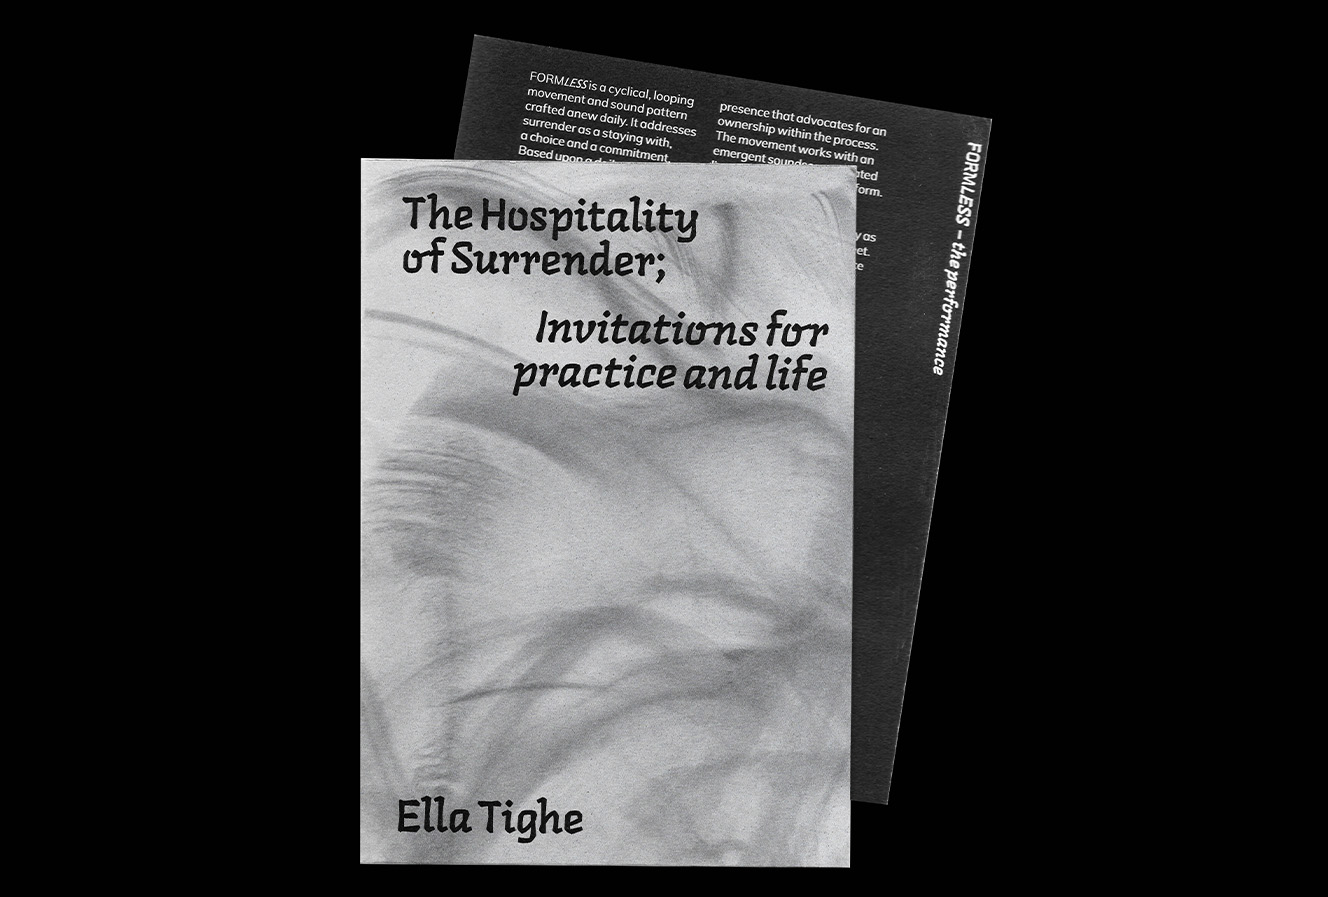 The Hospitality of Surrender; Invitations for practice and life, 2021